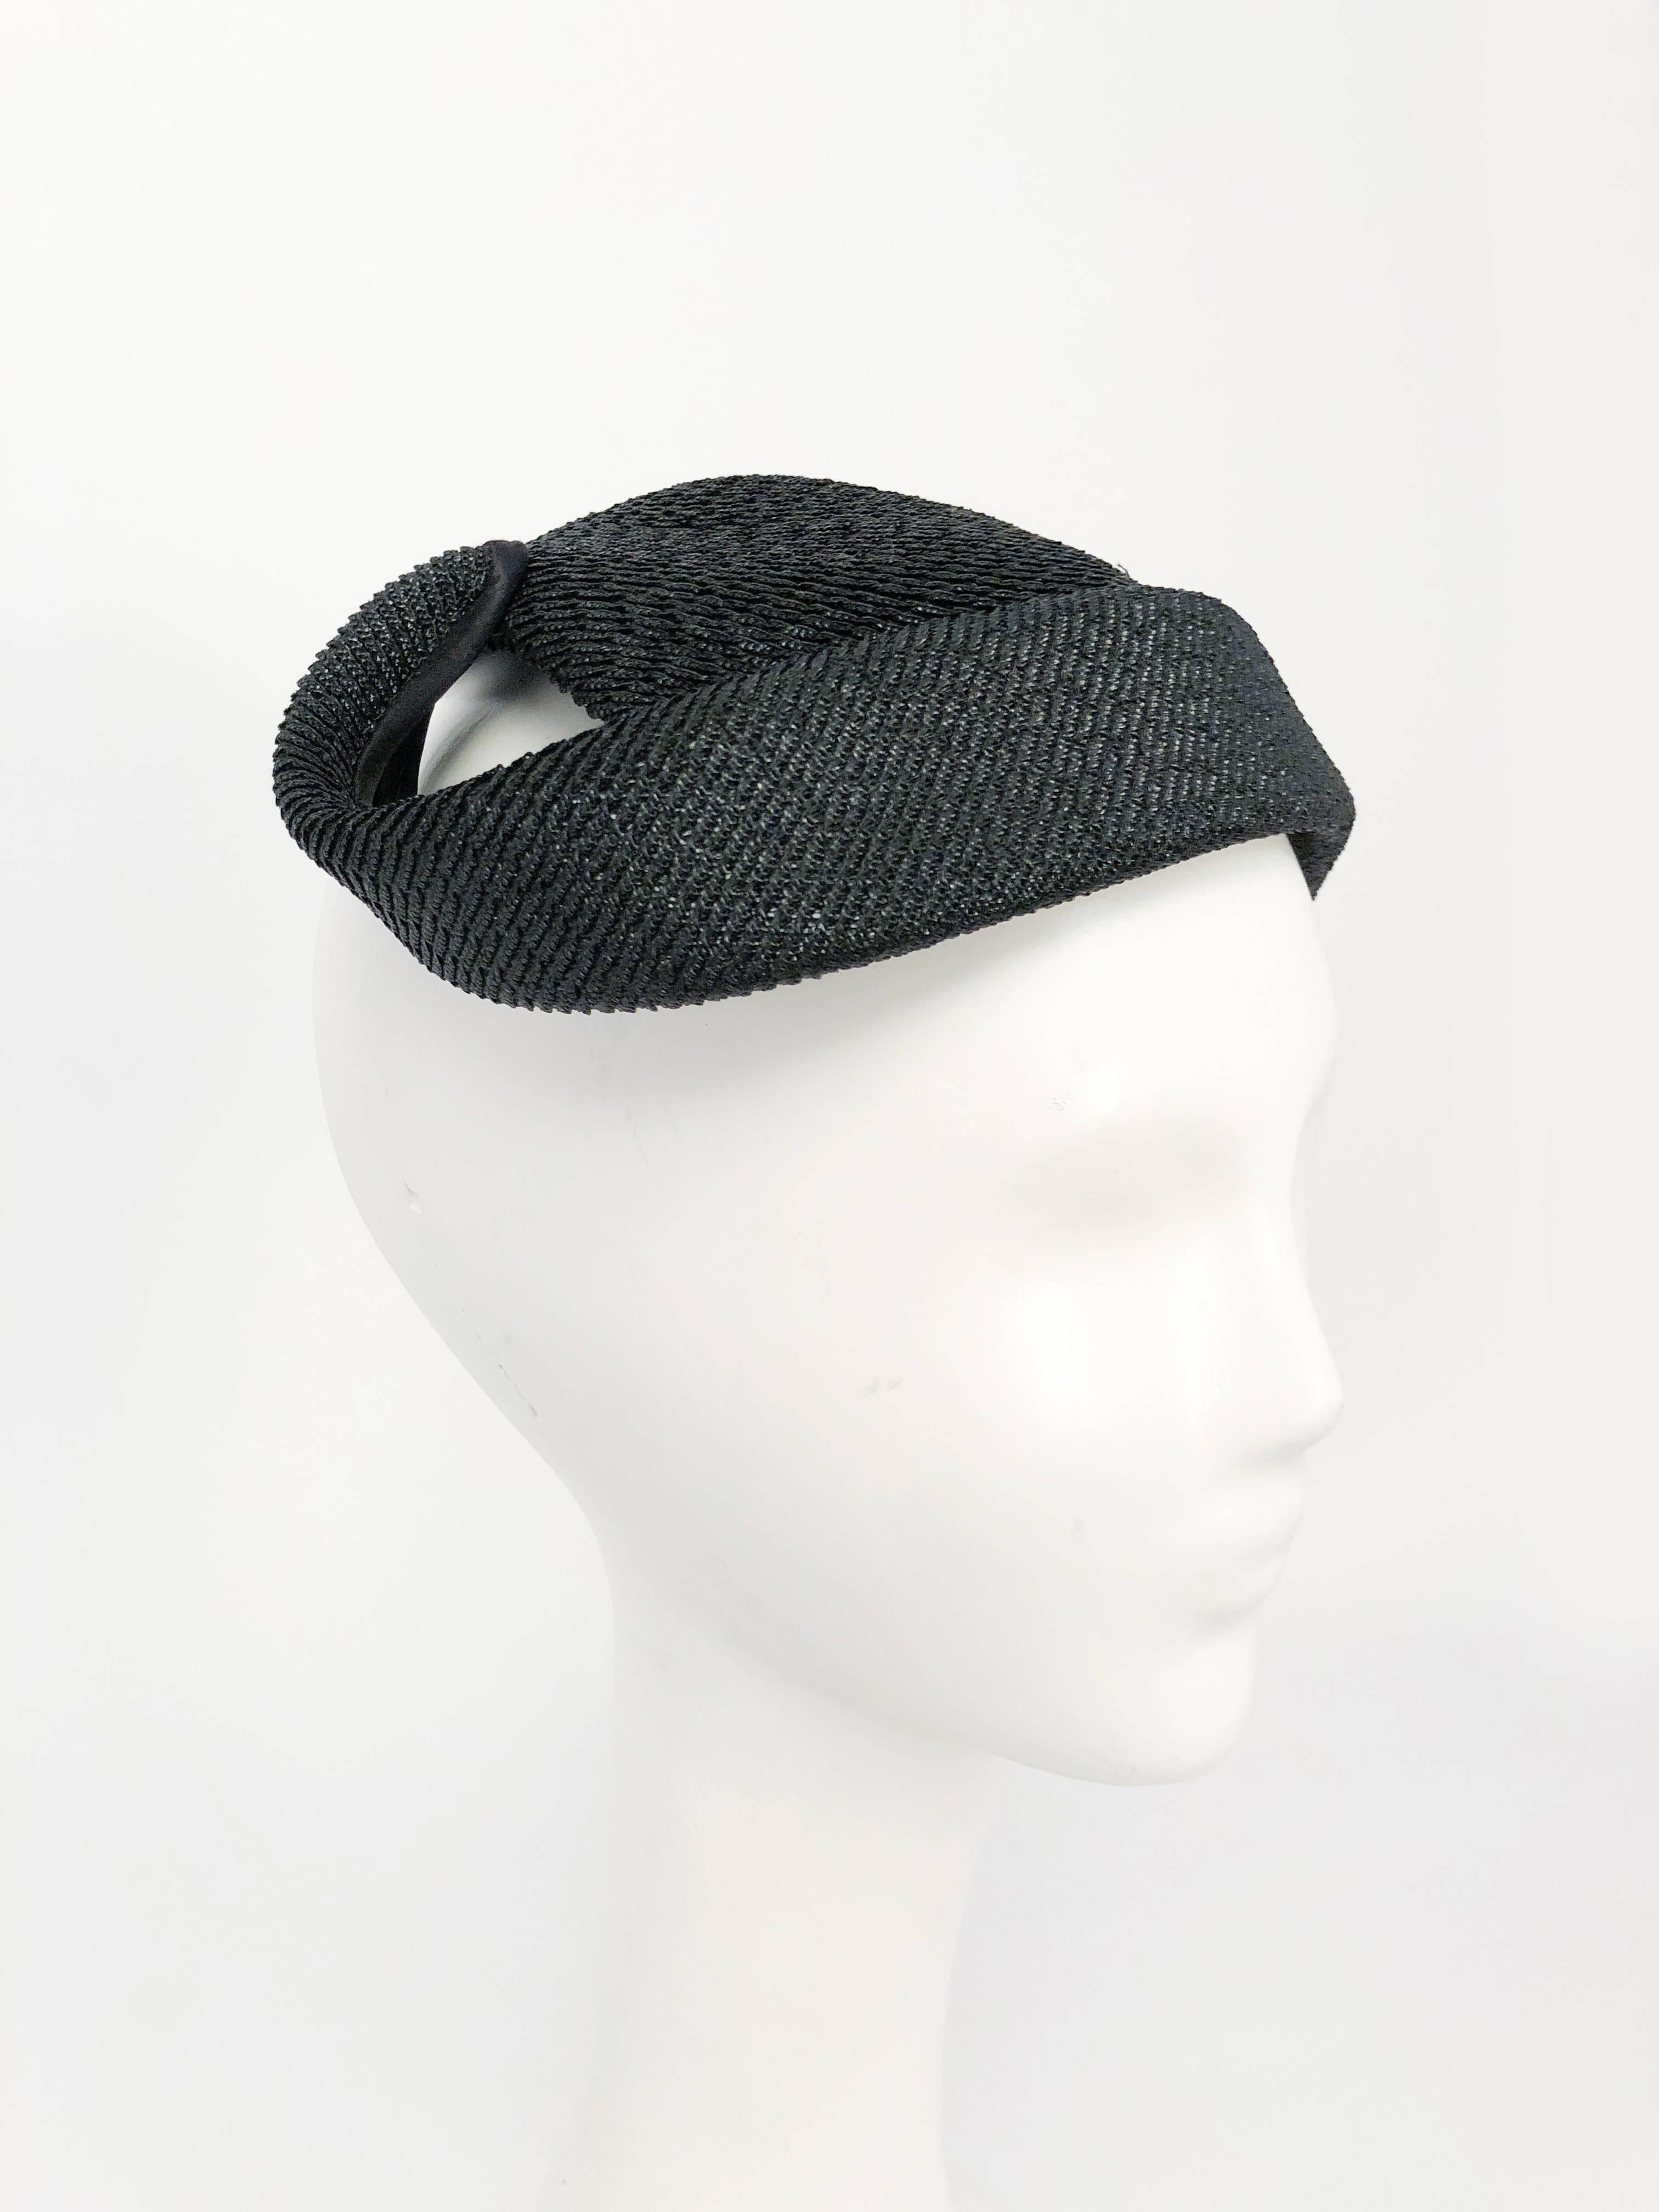 1950s Black Woven Straw Cocktail Hat with Beaded Leaf 1